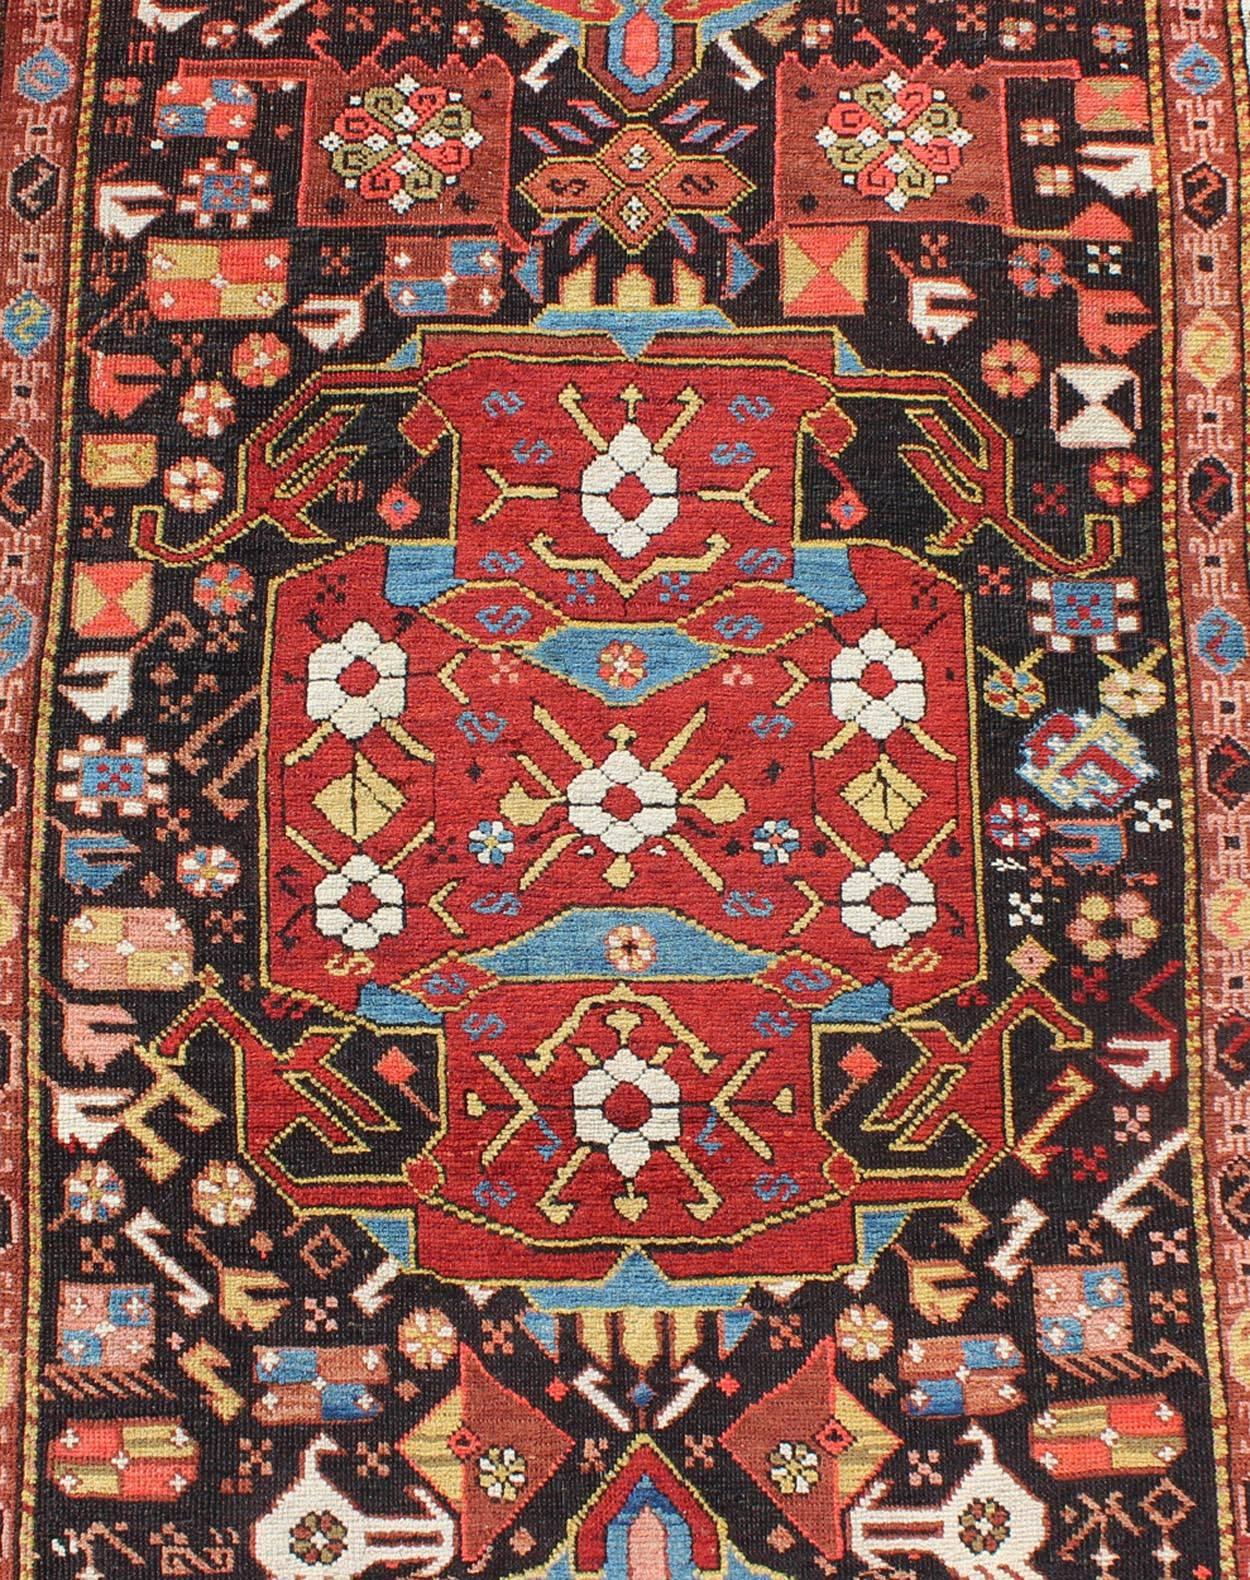 Antique Caucasian Karabagh Runner With Geometric Medallions in Jewel Tones  In Good Condition For Sale In Atlanta, GA